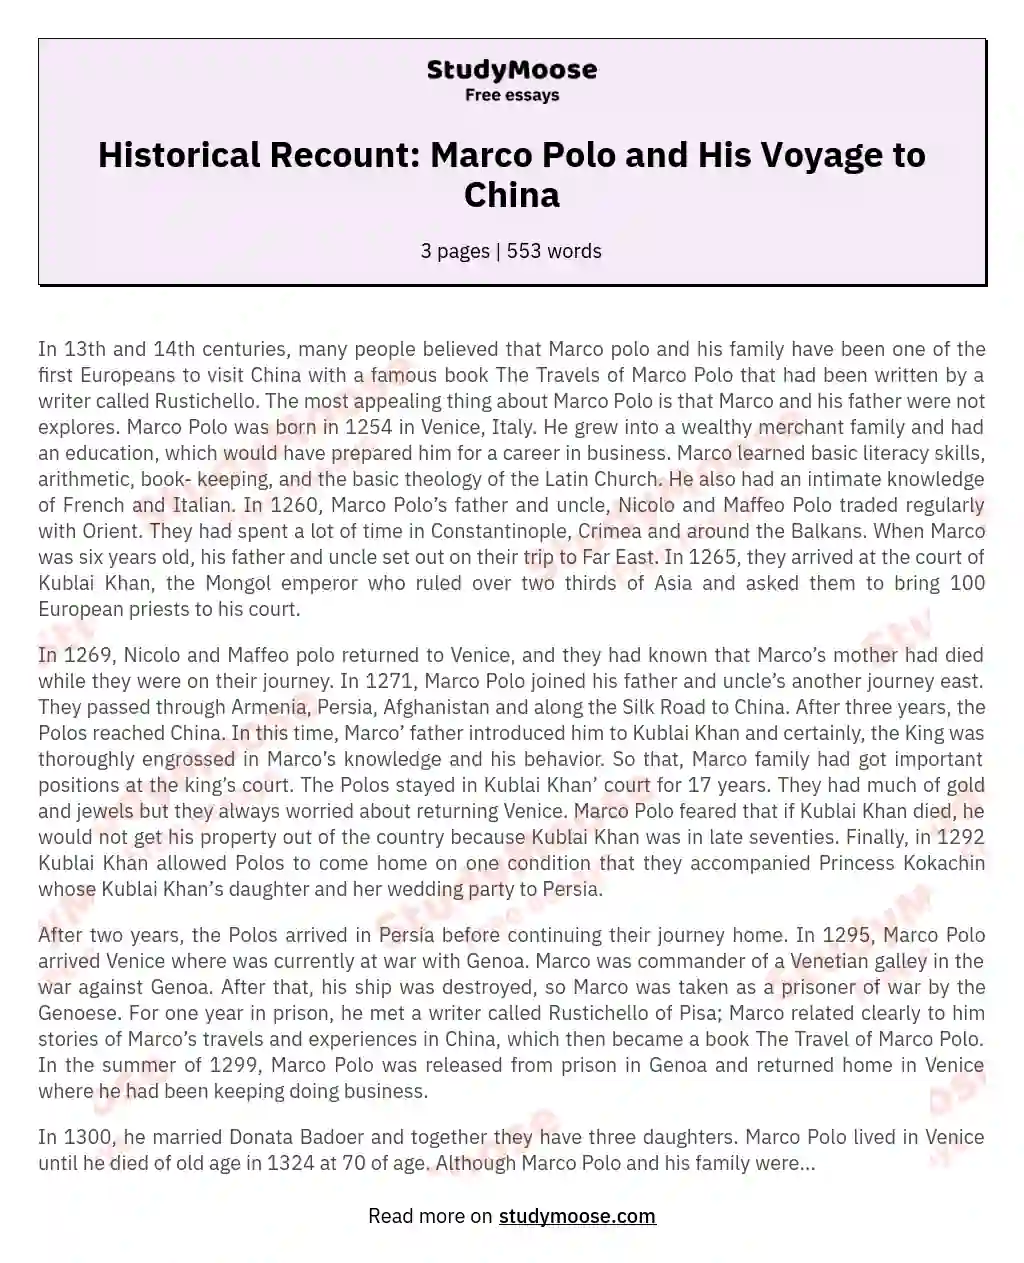 Historical Recount: Marco Polo and His Voyage to China essay